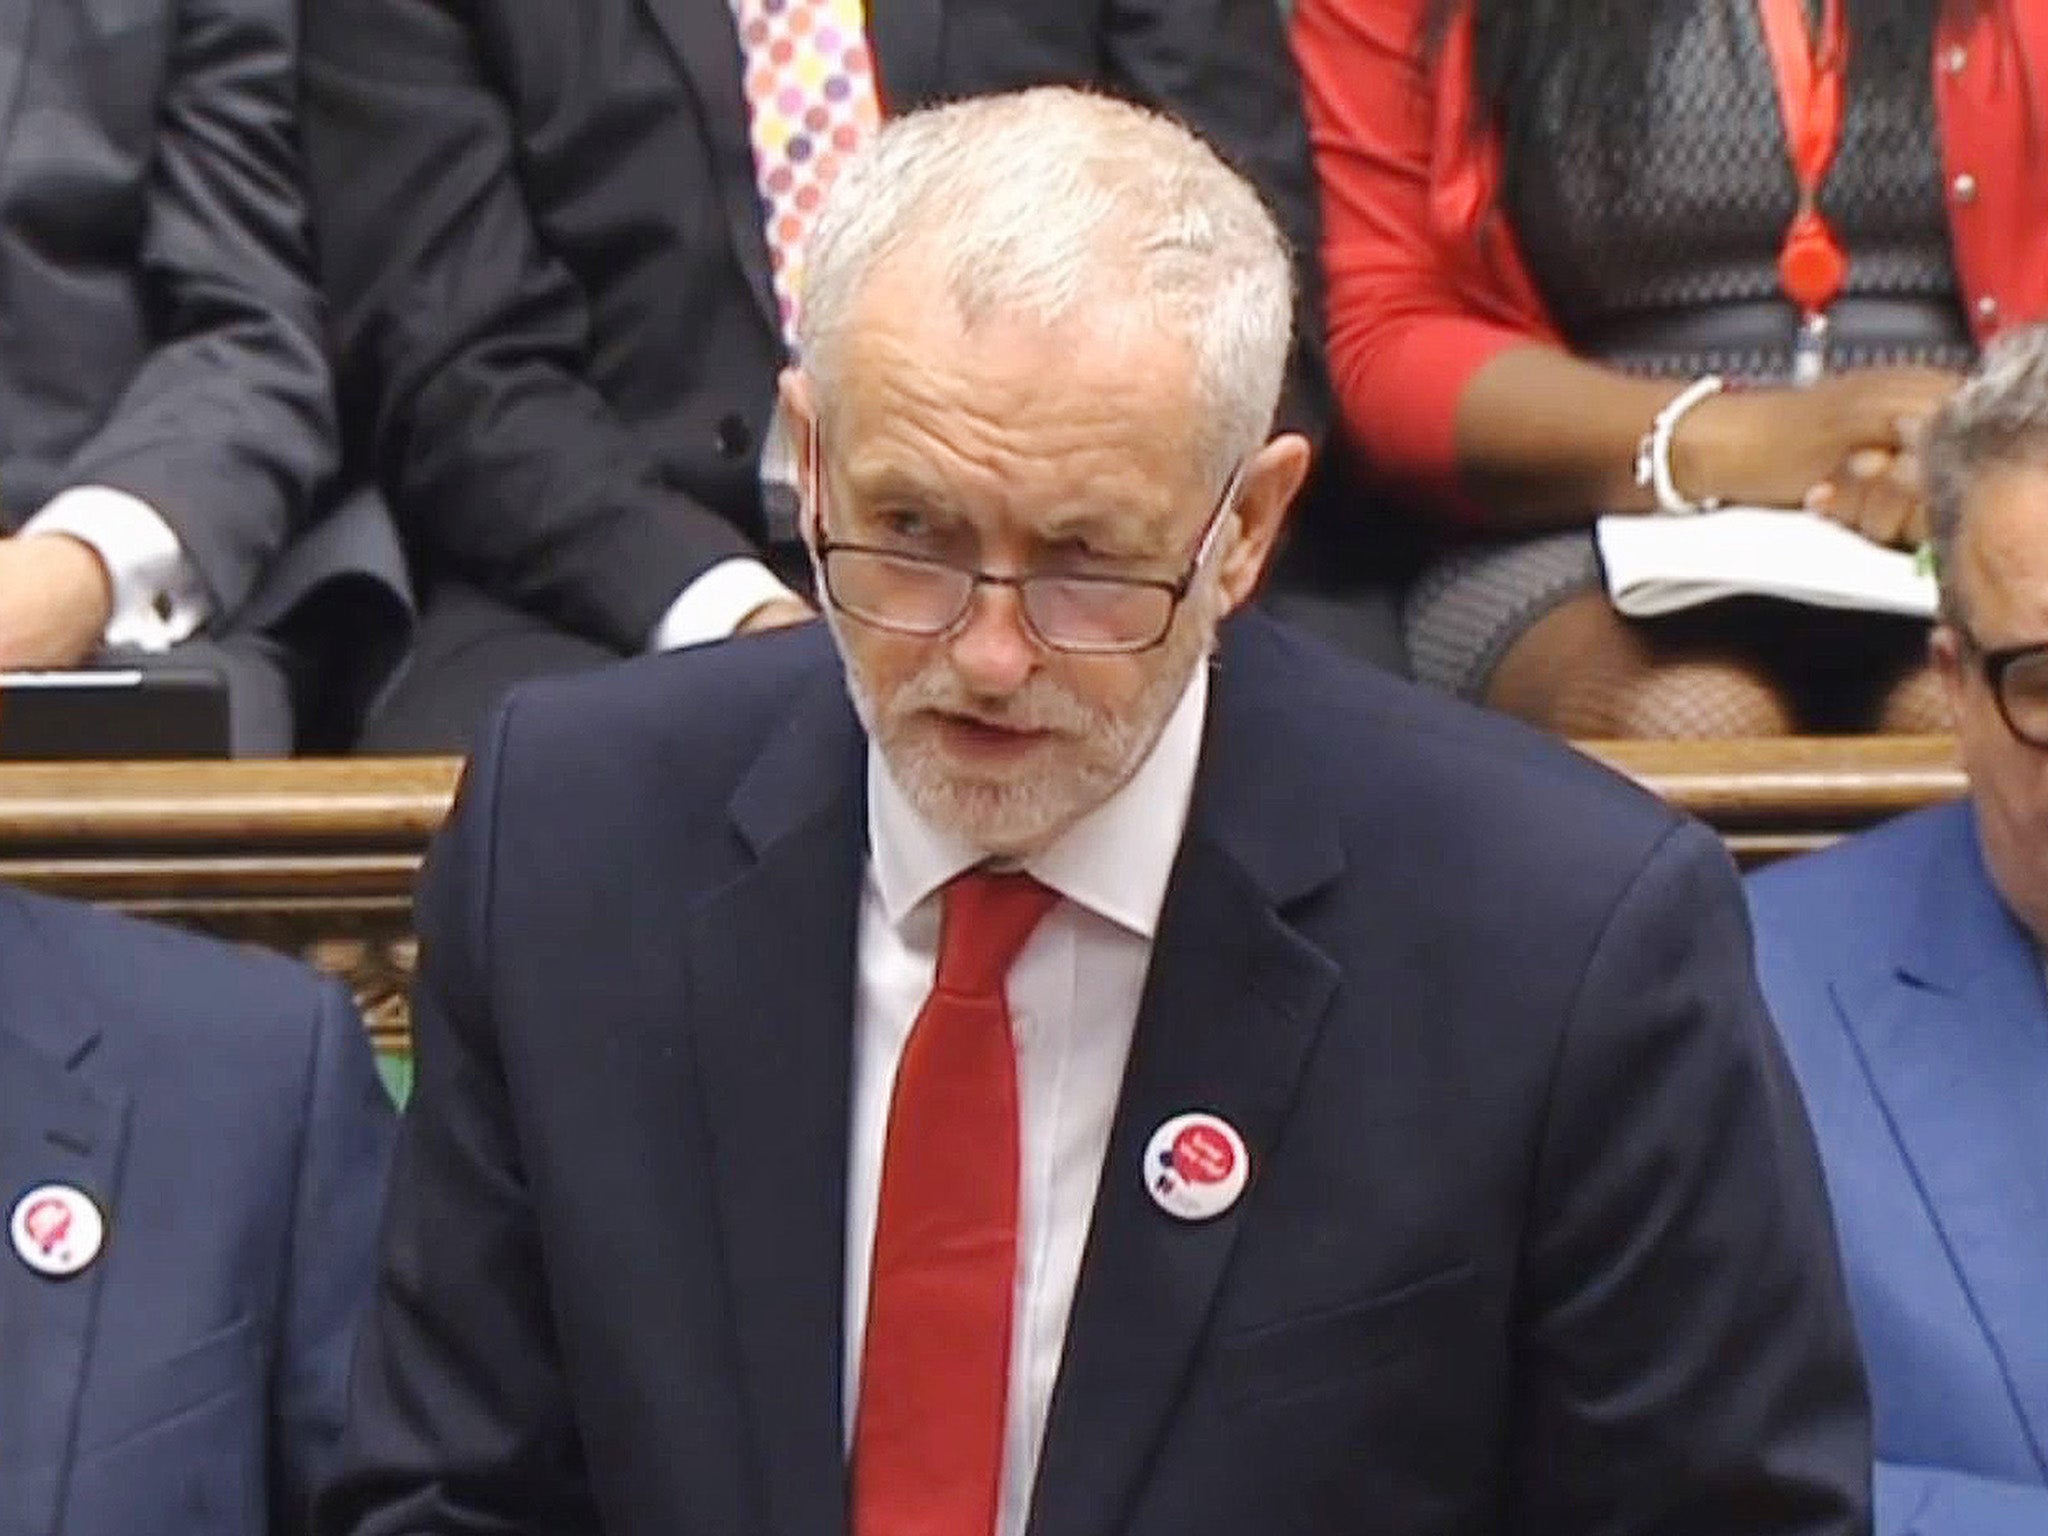 The first PMQs since the general election saw Jeremy Corbyn raise questions about austerity